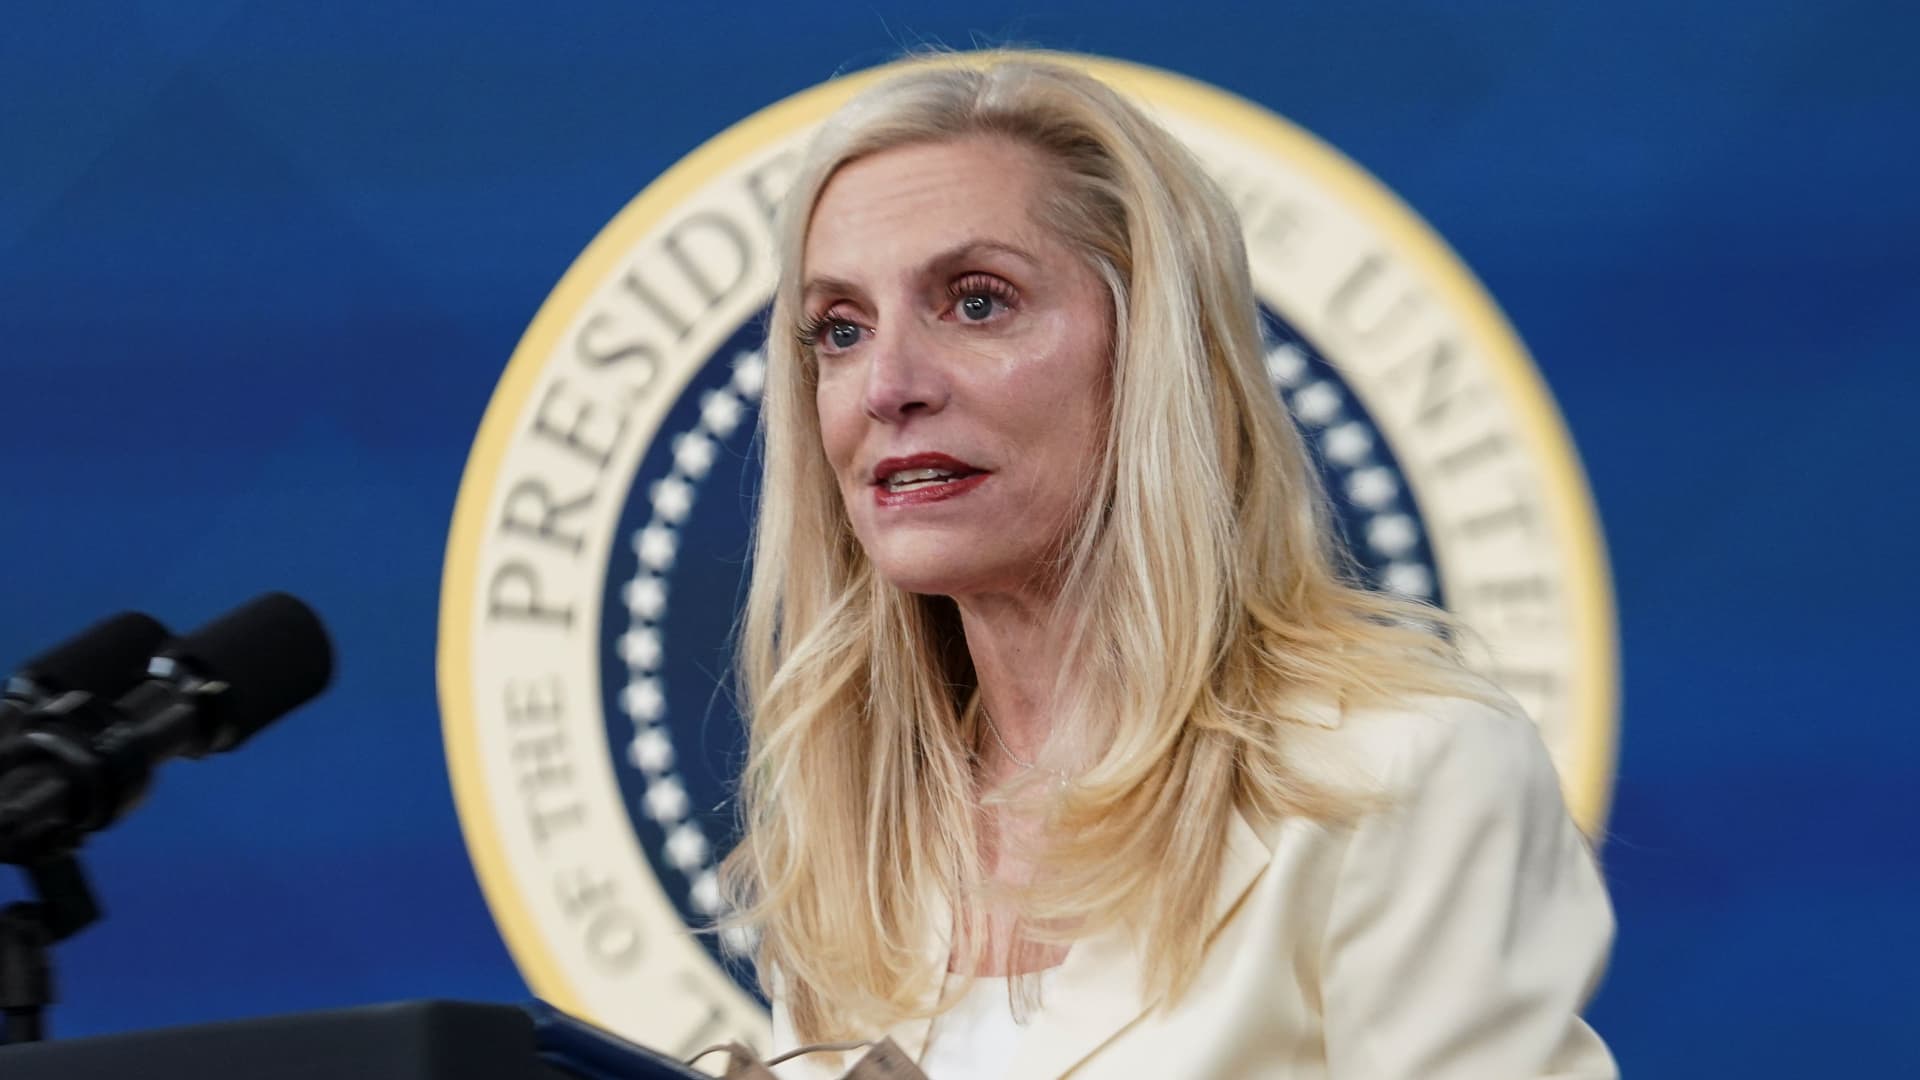 U.S. Federal Reserve board member Lael Brainard speaks after she was nominated by U.S. President Joe Biden to serve as vice chair of the Federal Reserve, in the Eisenhower Executive Office Building’s South Court Auditorium at the White House in Washington, U.S., November 22, 2021.